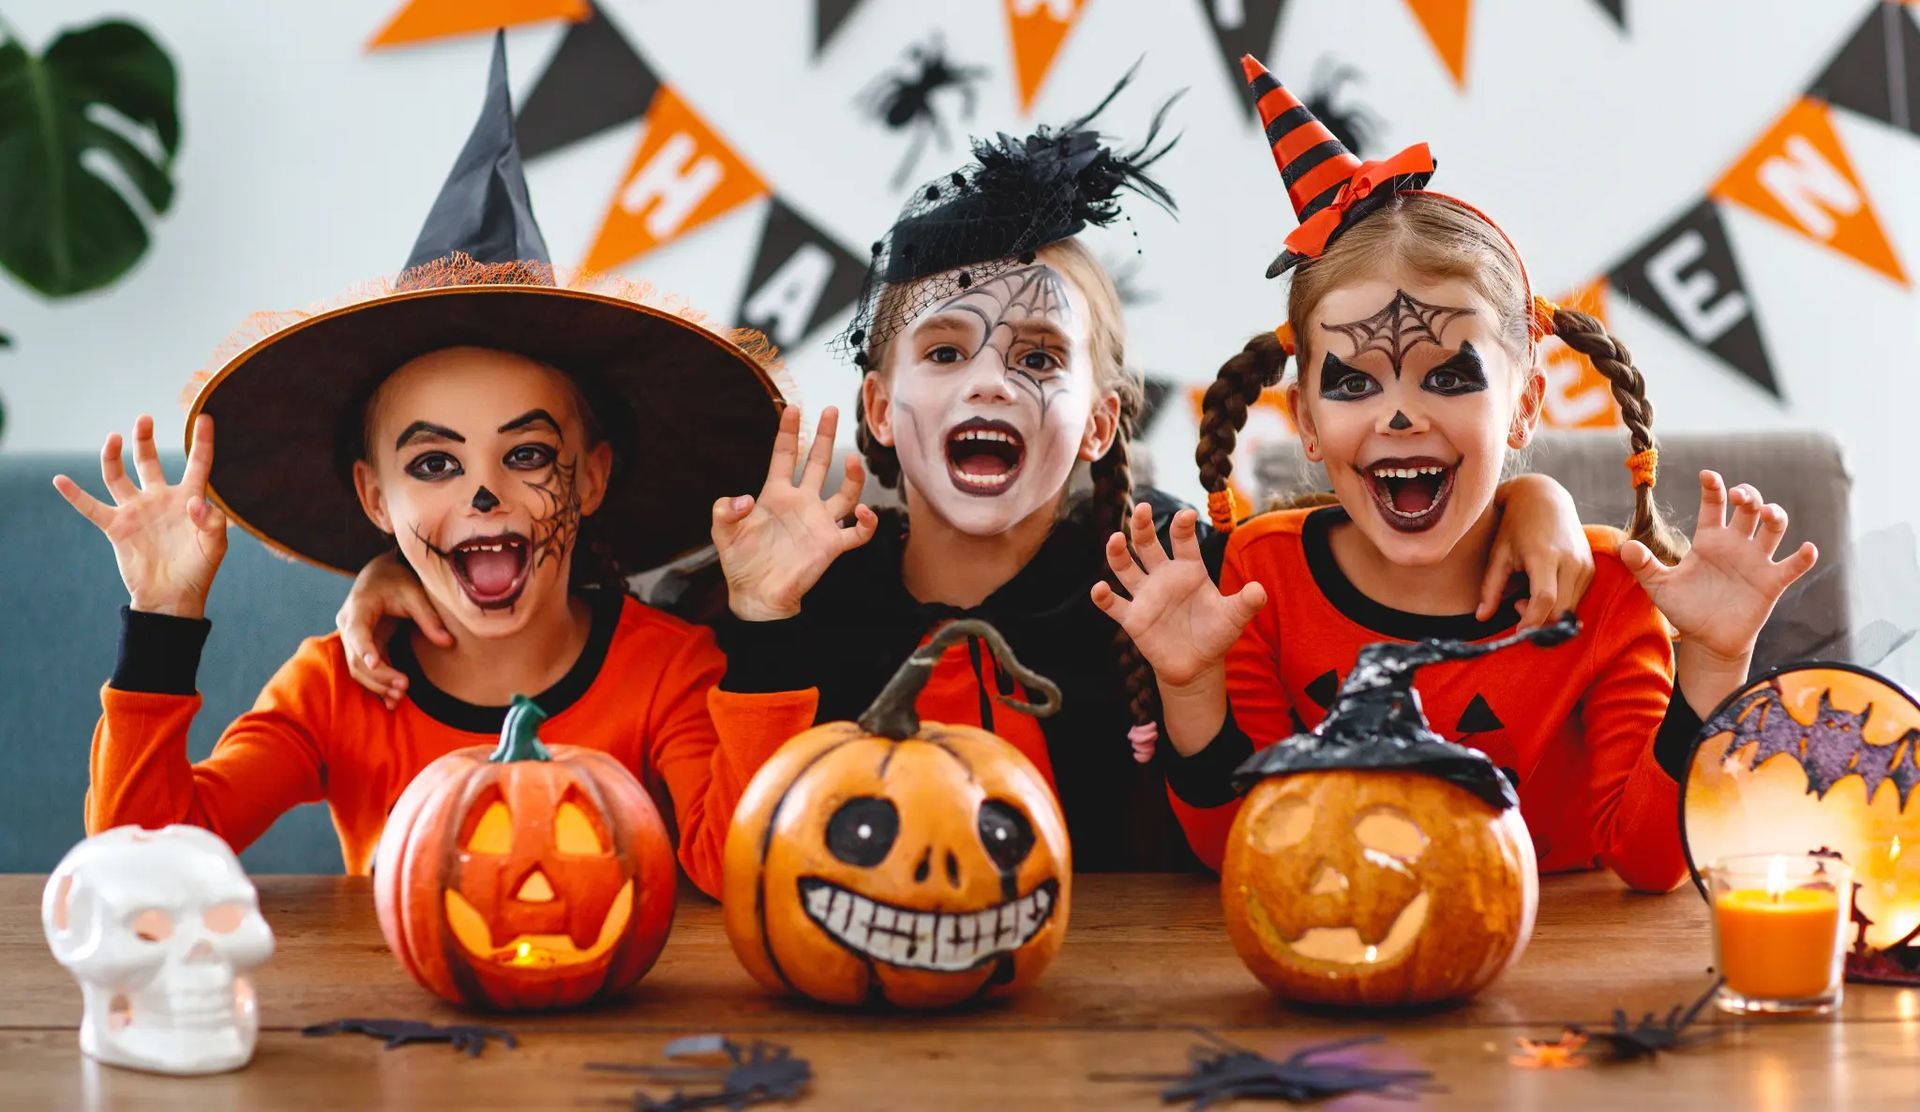 Halloween killed! ‘Woke’ schools axing kids’ parties over inequality is a haunting new low